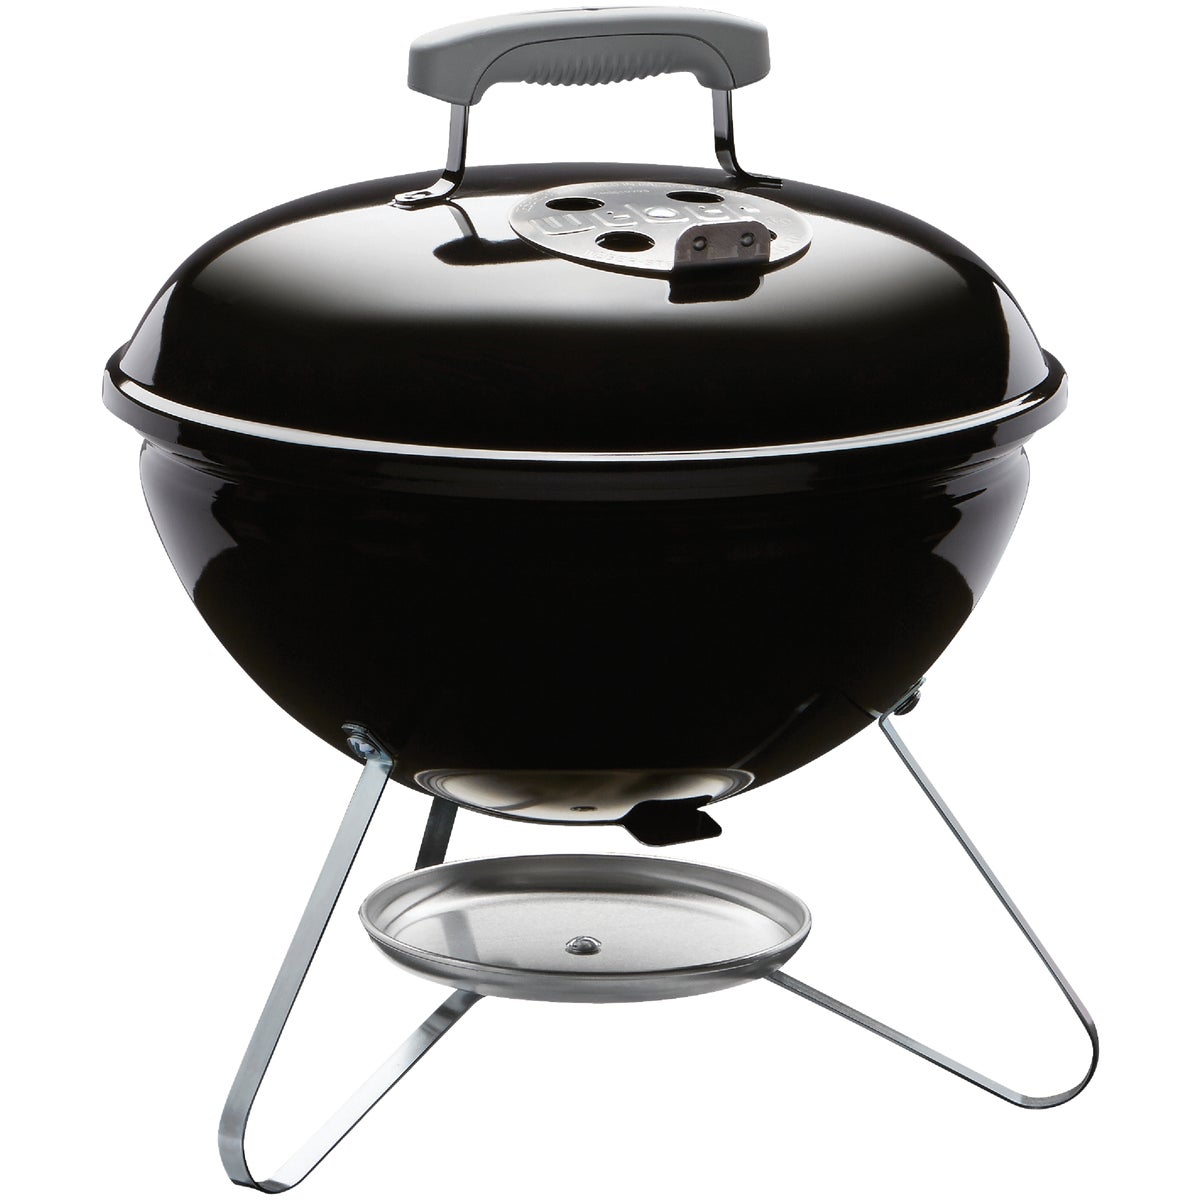 Item 808938, Smokey Joe charcoal grill with a compact 14 In.